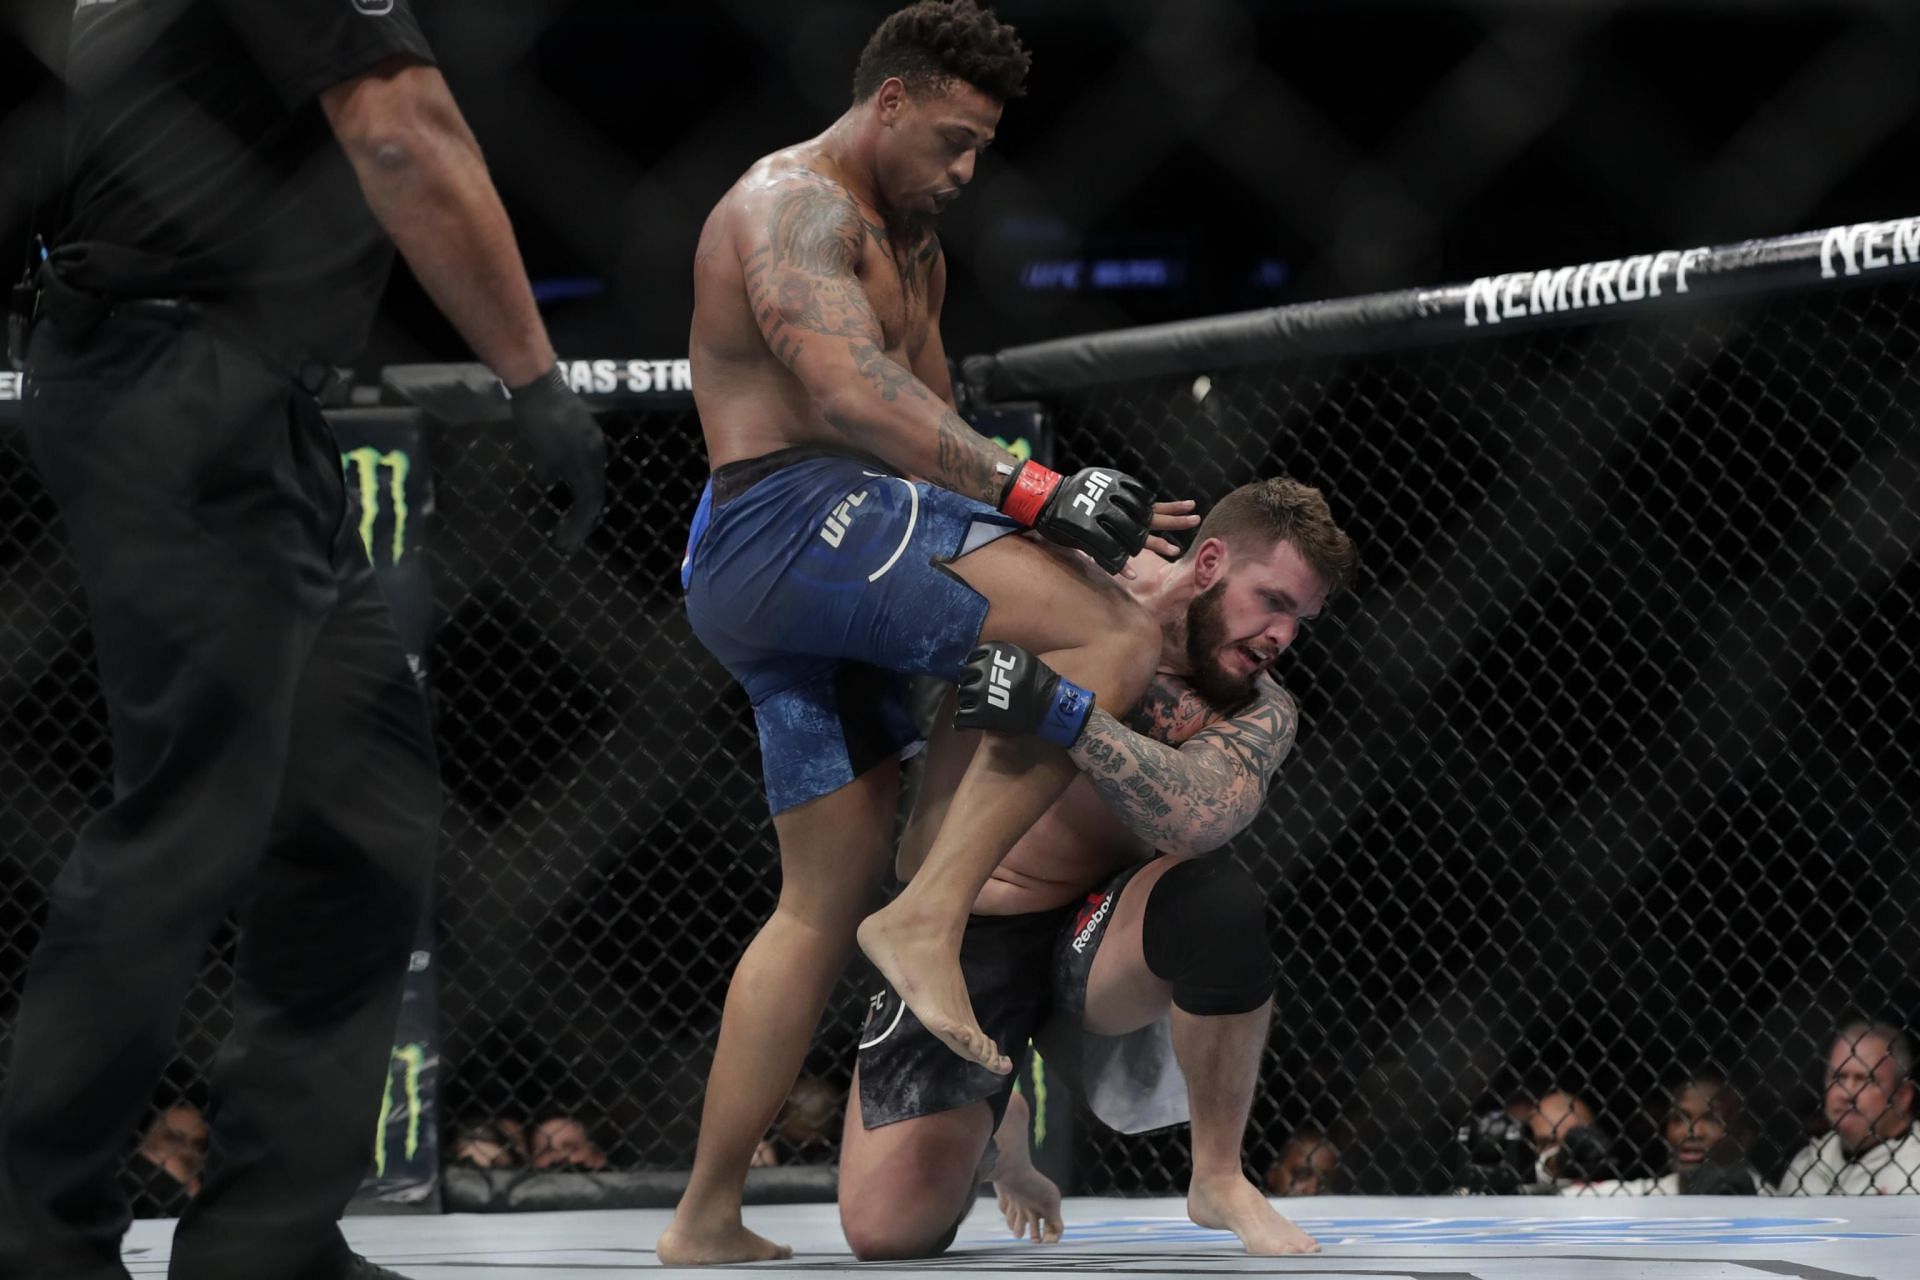 Greg Hardy has failed to avoid controversy since arriving in the octagon